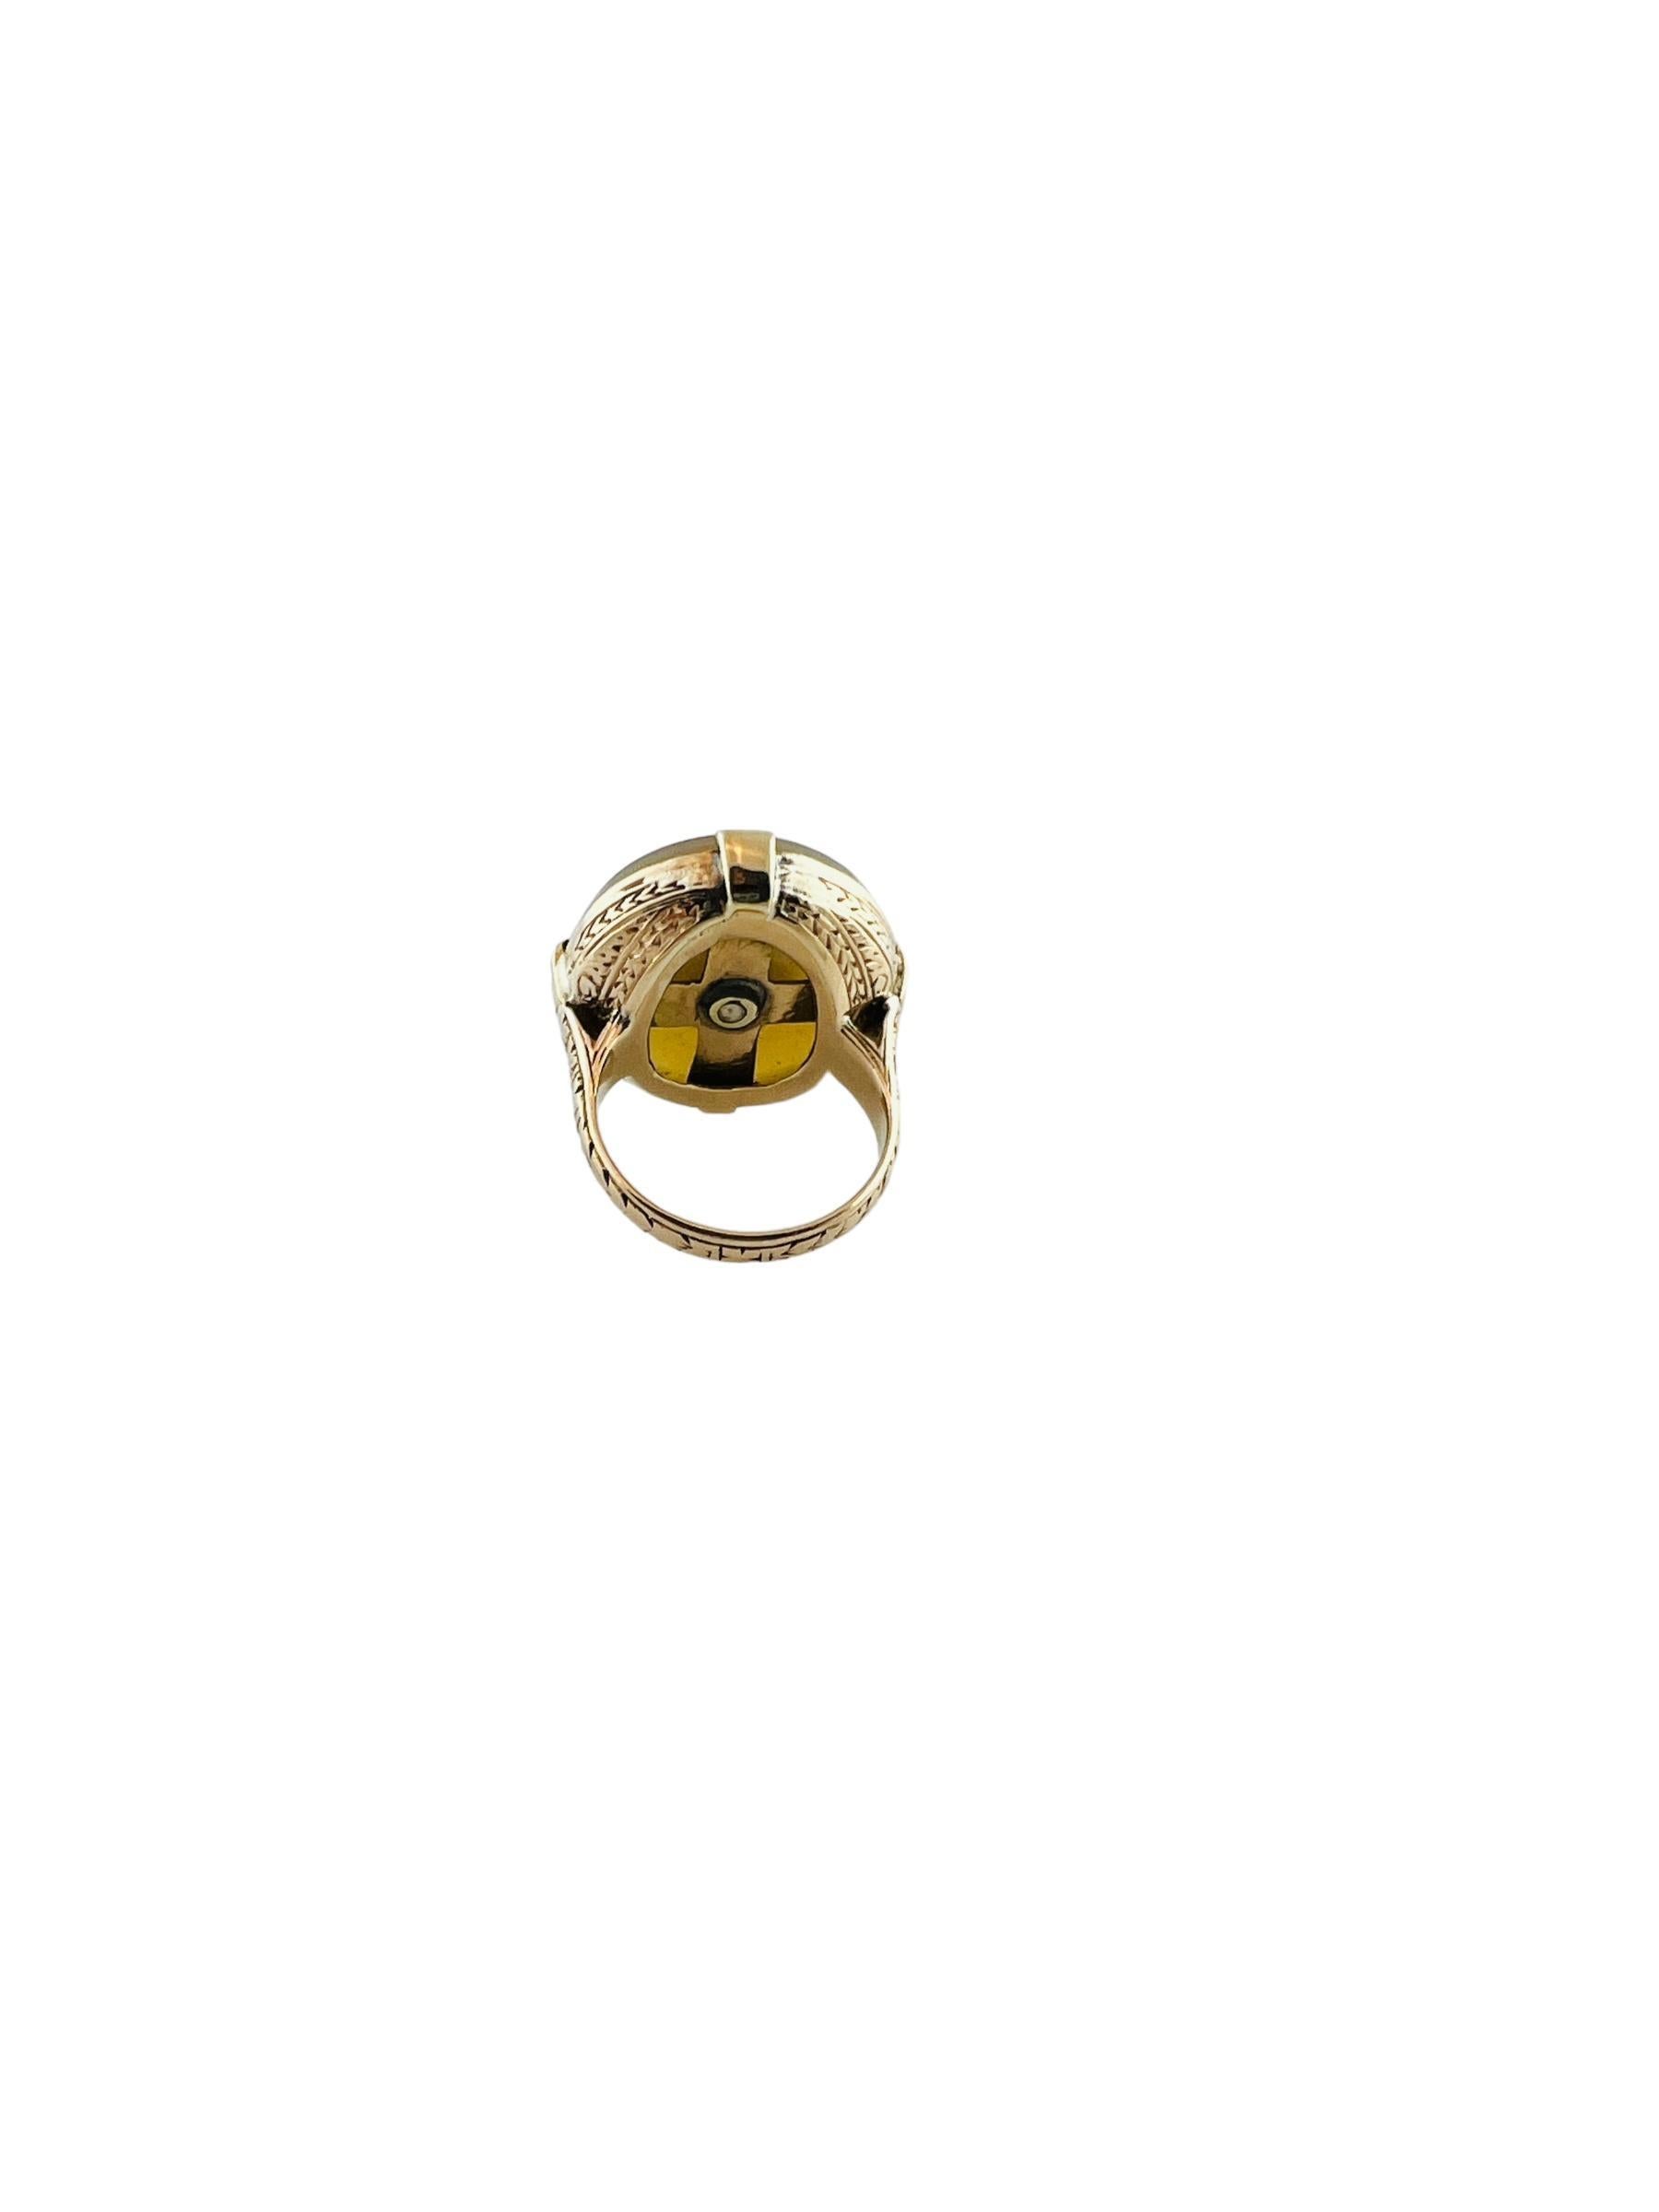 Women's  14K Yellow Gold Round Black Onyx Seed Pearl Ring #16001 For Sale